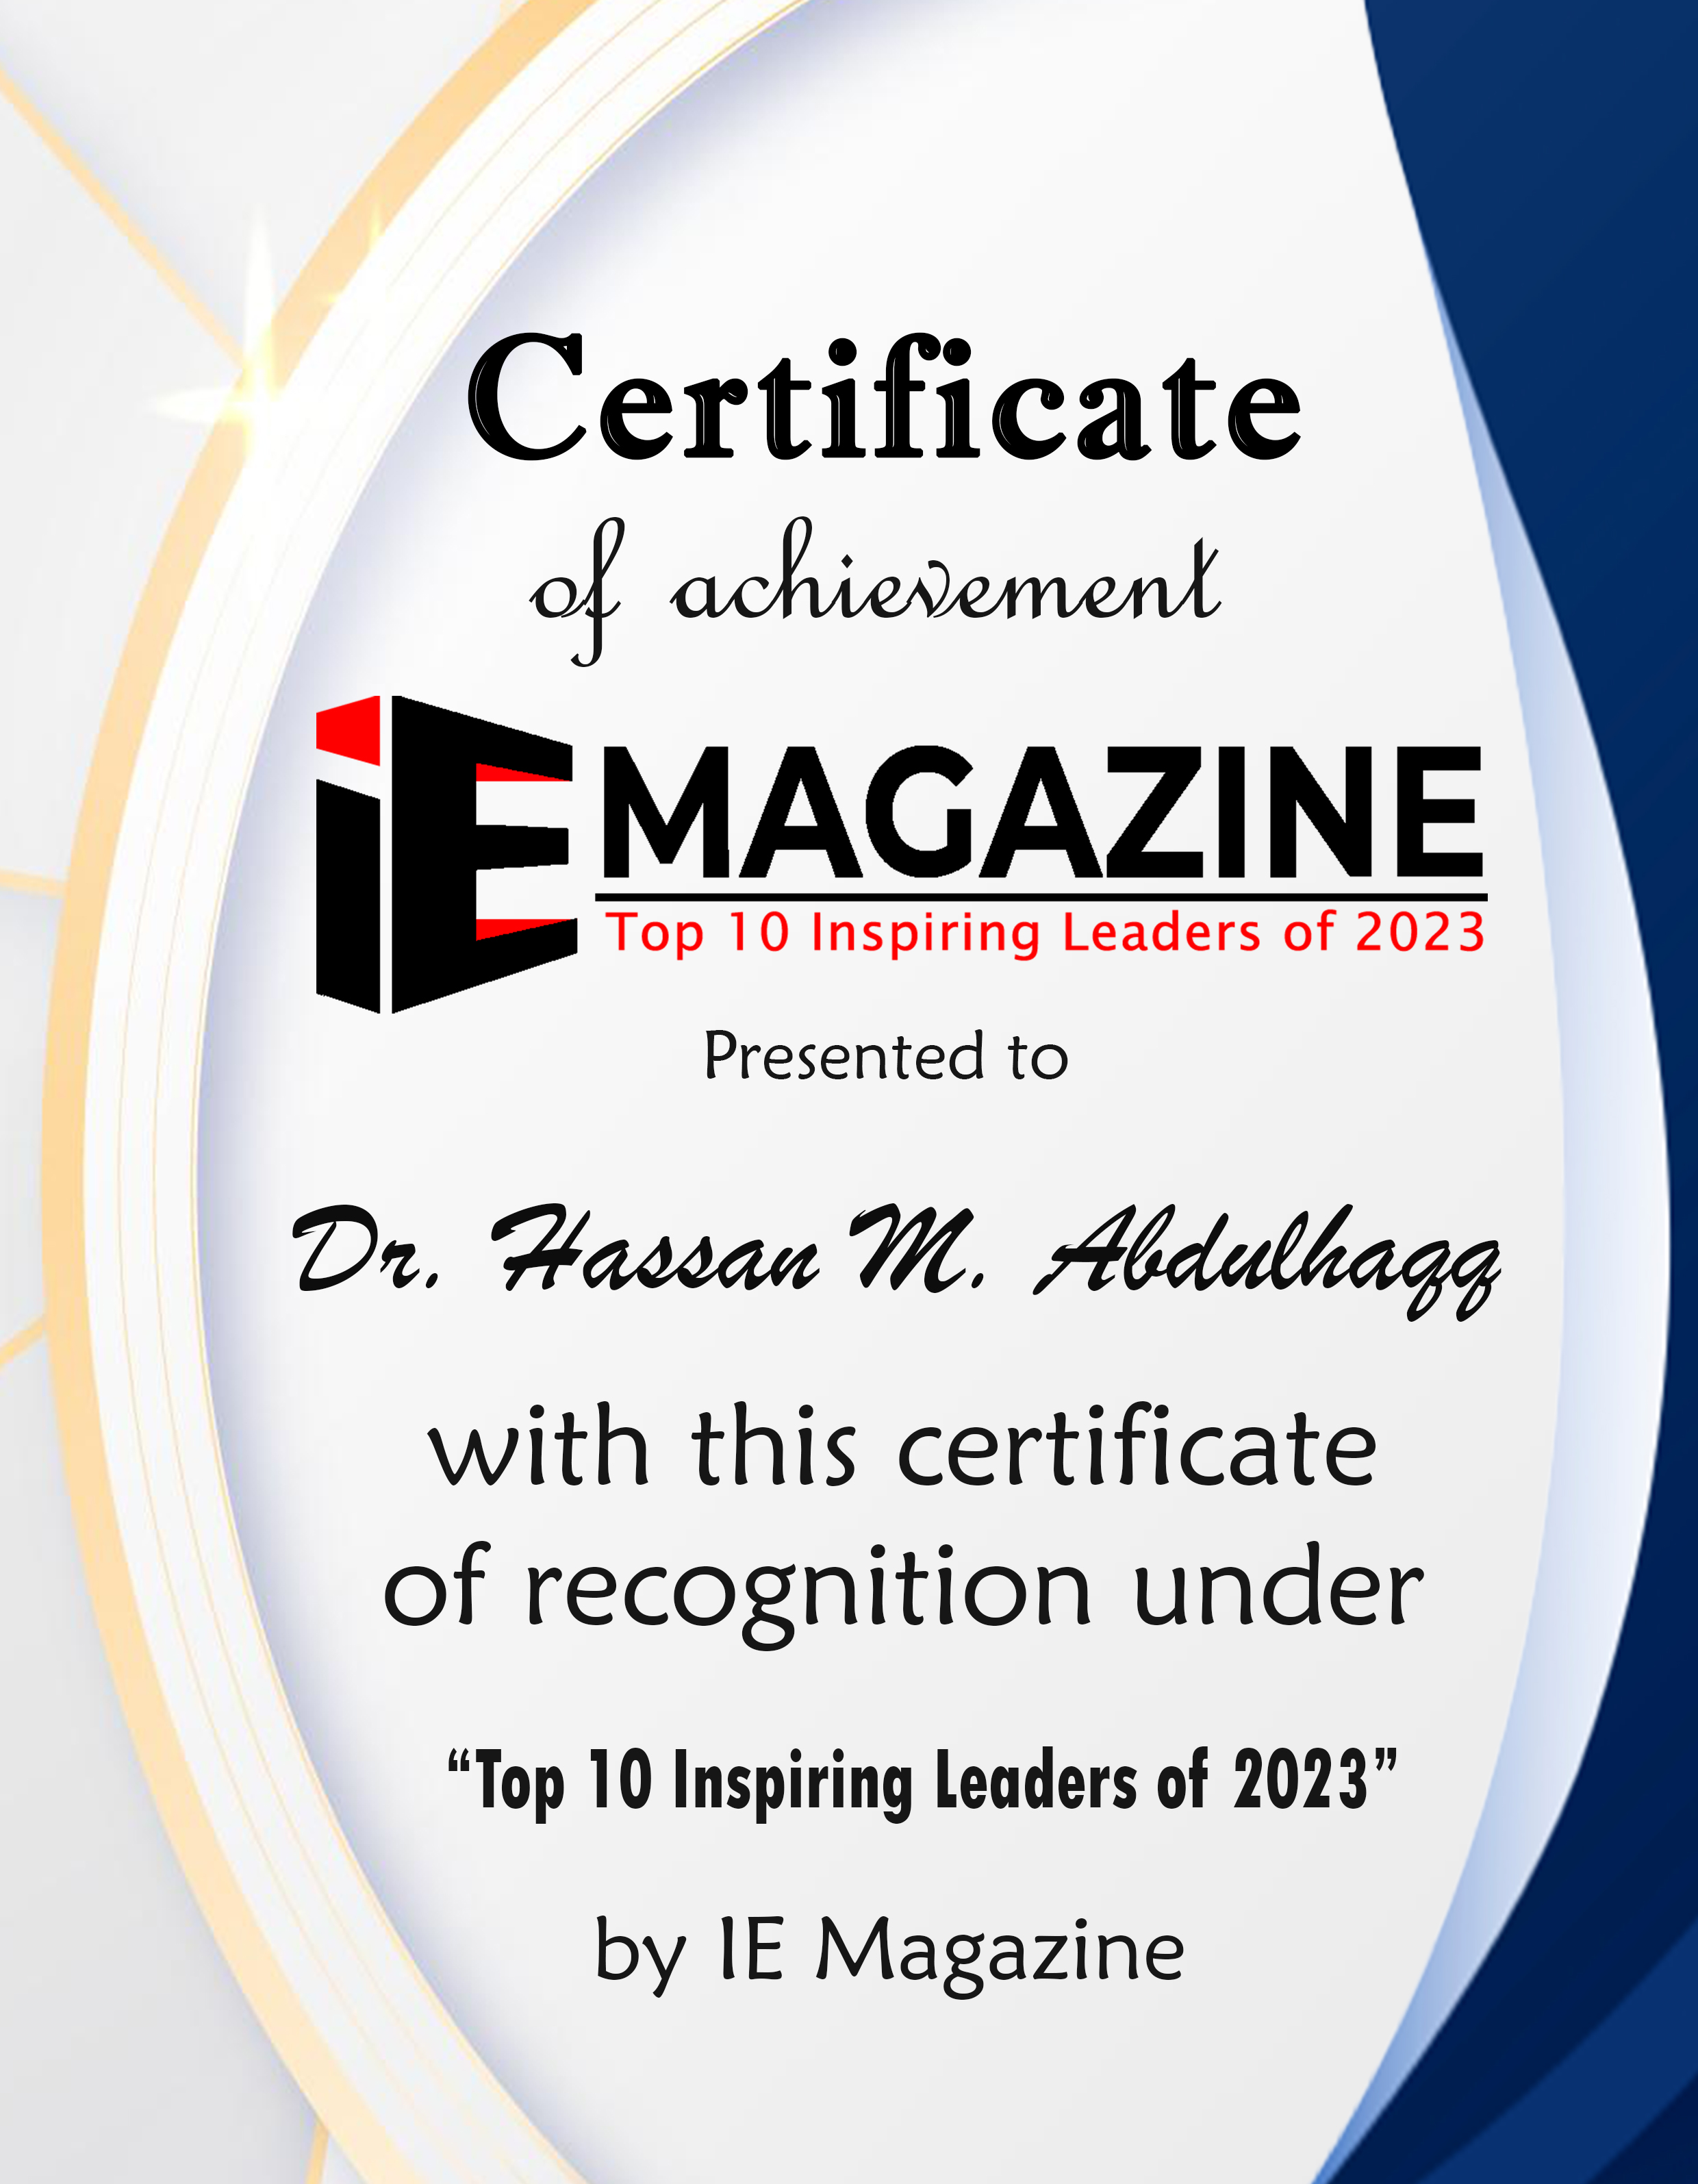 Dr. Hassan M. Abdulhaqq, Vice President of Talent Acquisition, Development and Engagement of AHRC NASSAU Certificate